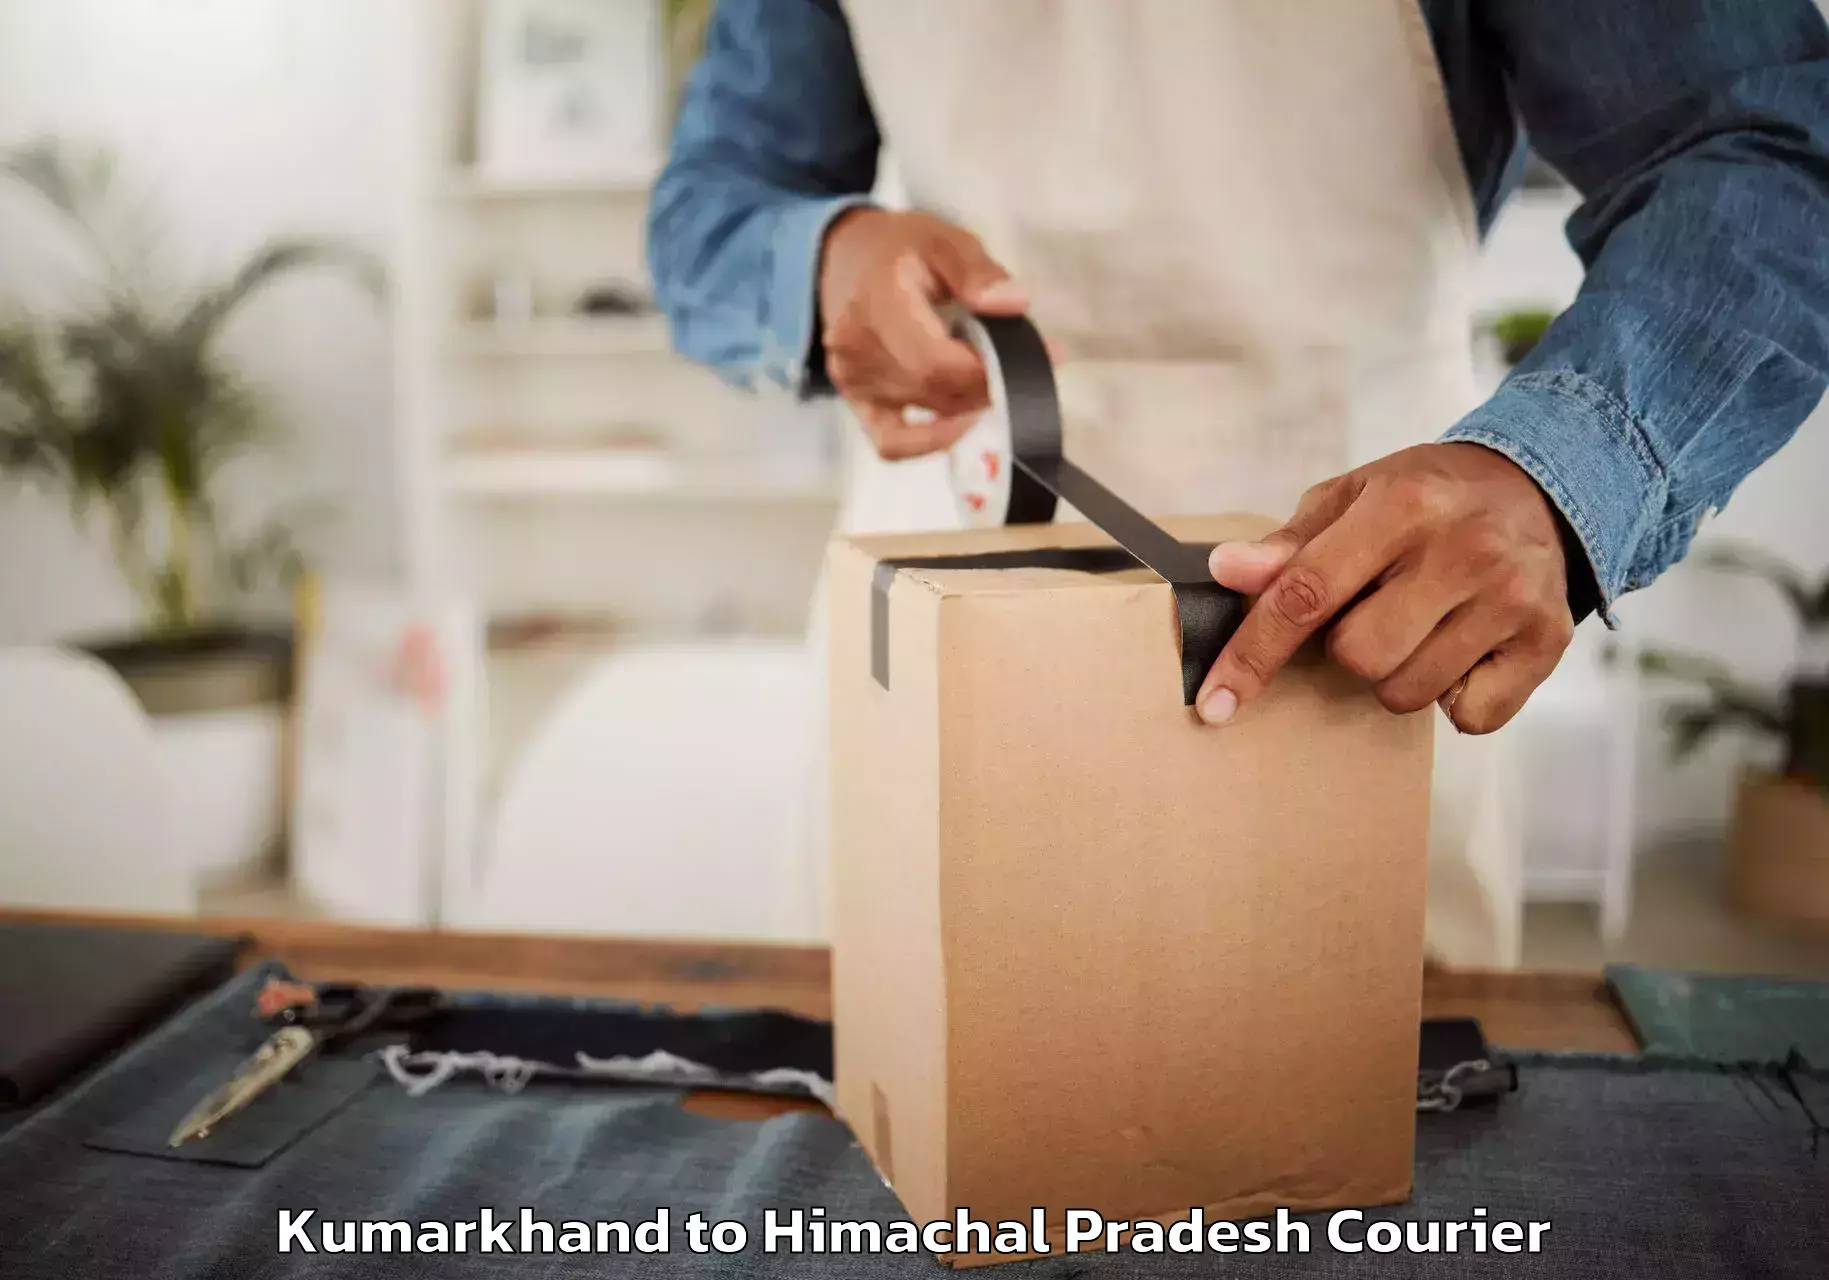 Moving and handling services Kumarkhand to Una Himachal Pradesh